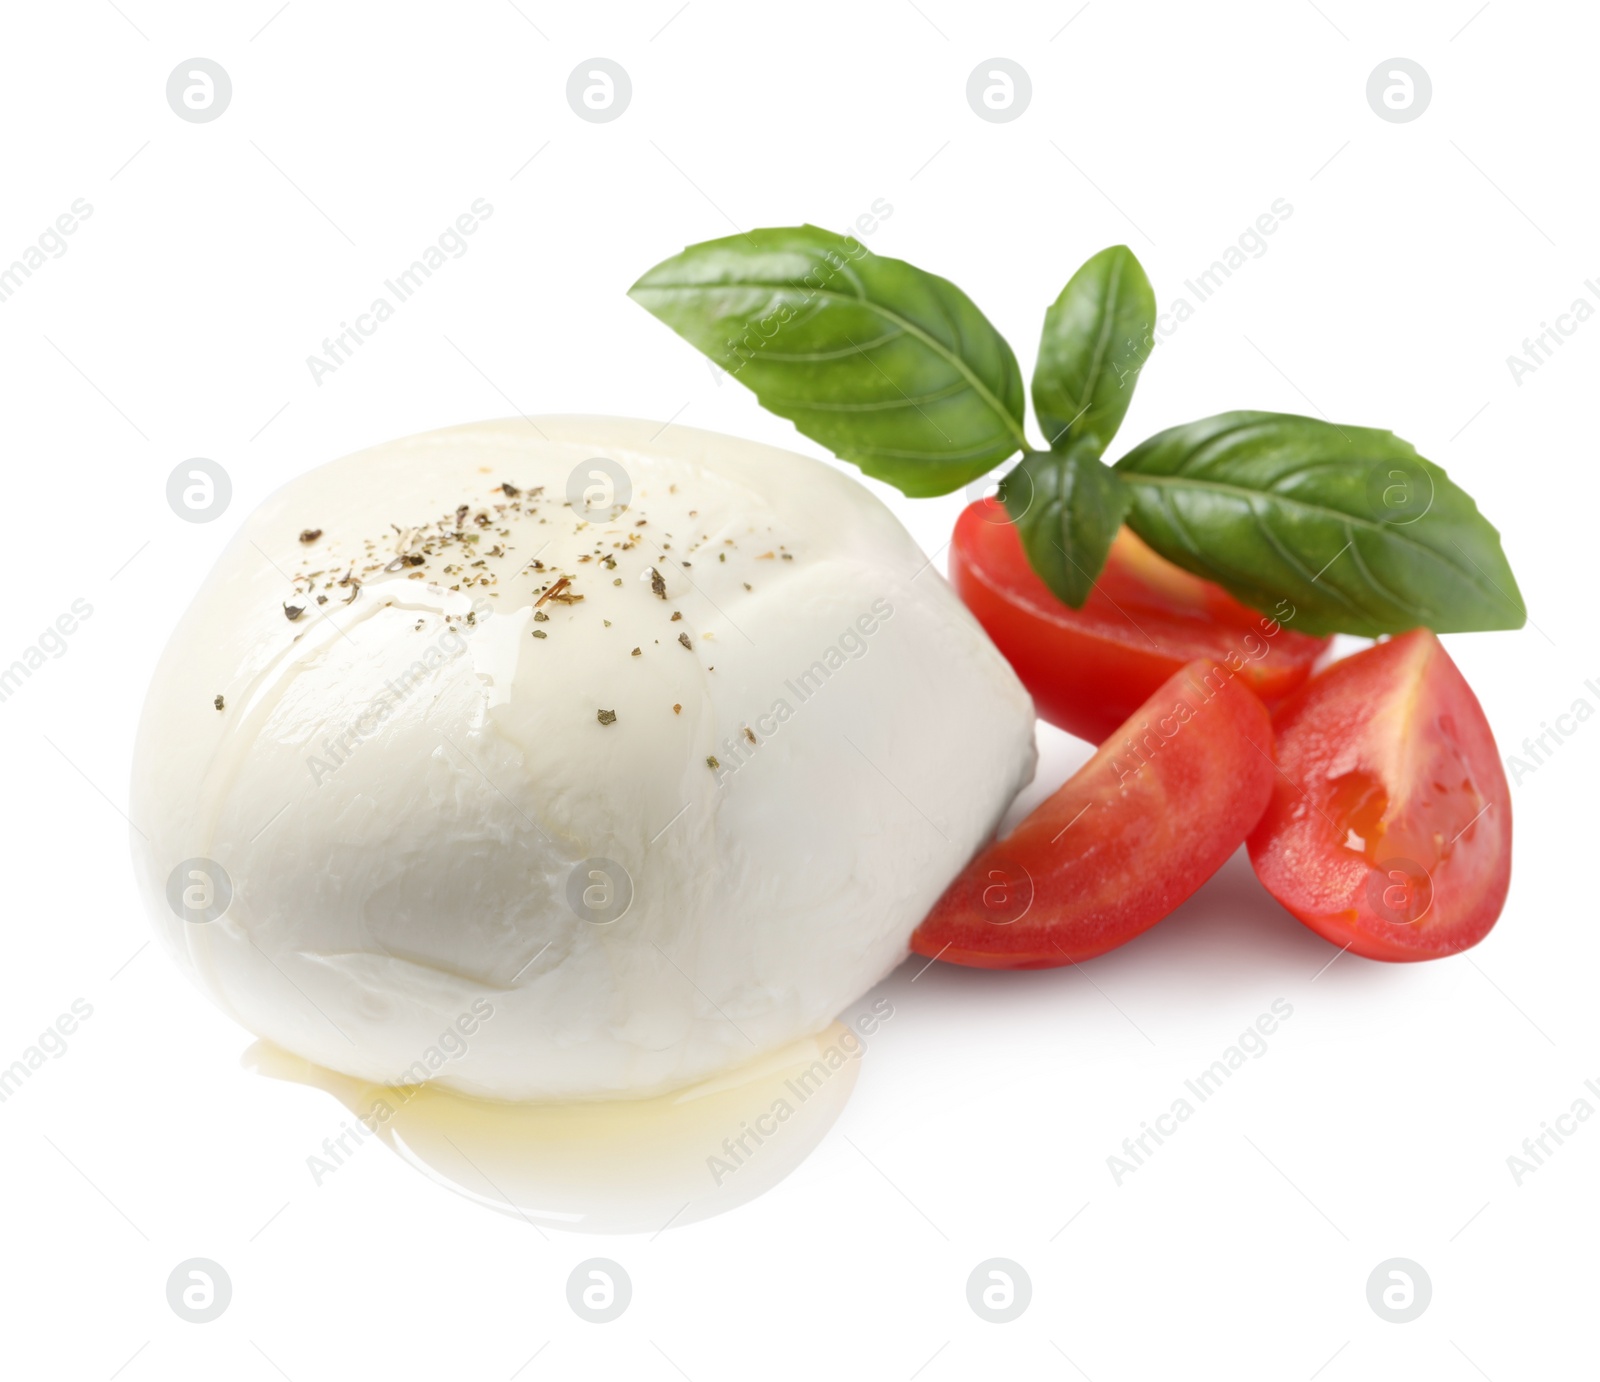 Photo of Delicious mozzarella with tomatoes and basil leaves on white background